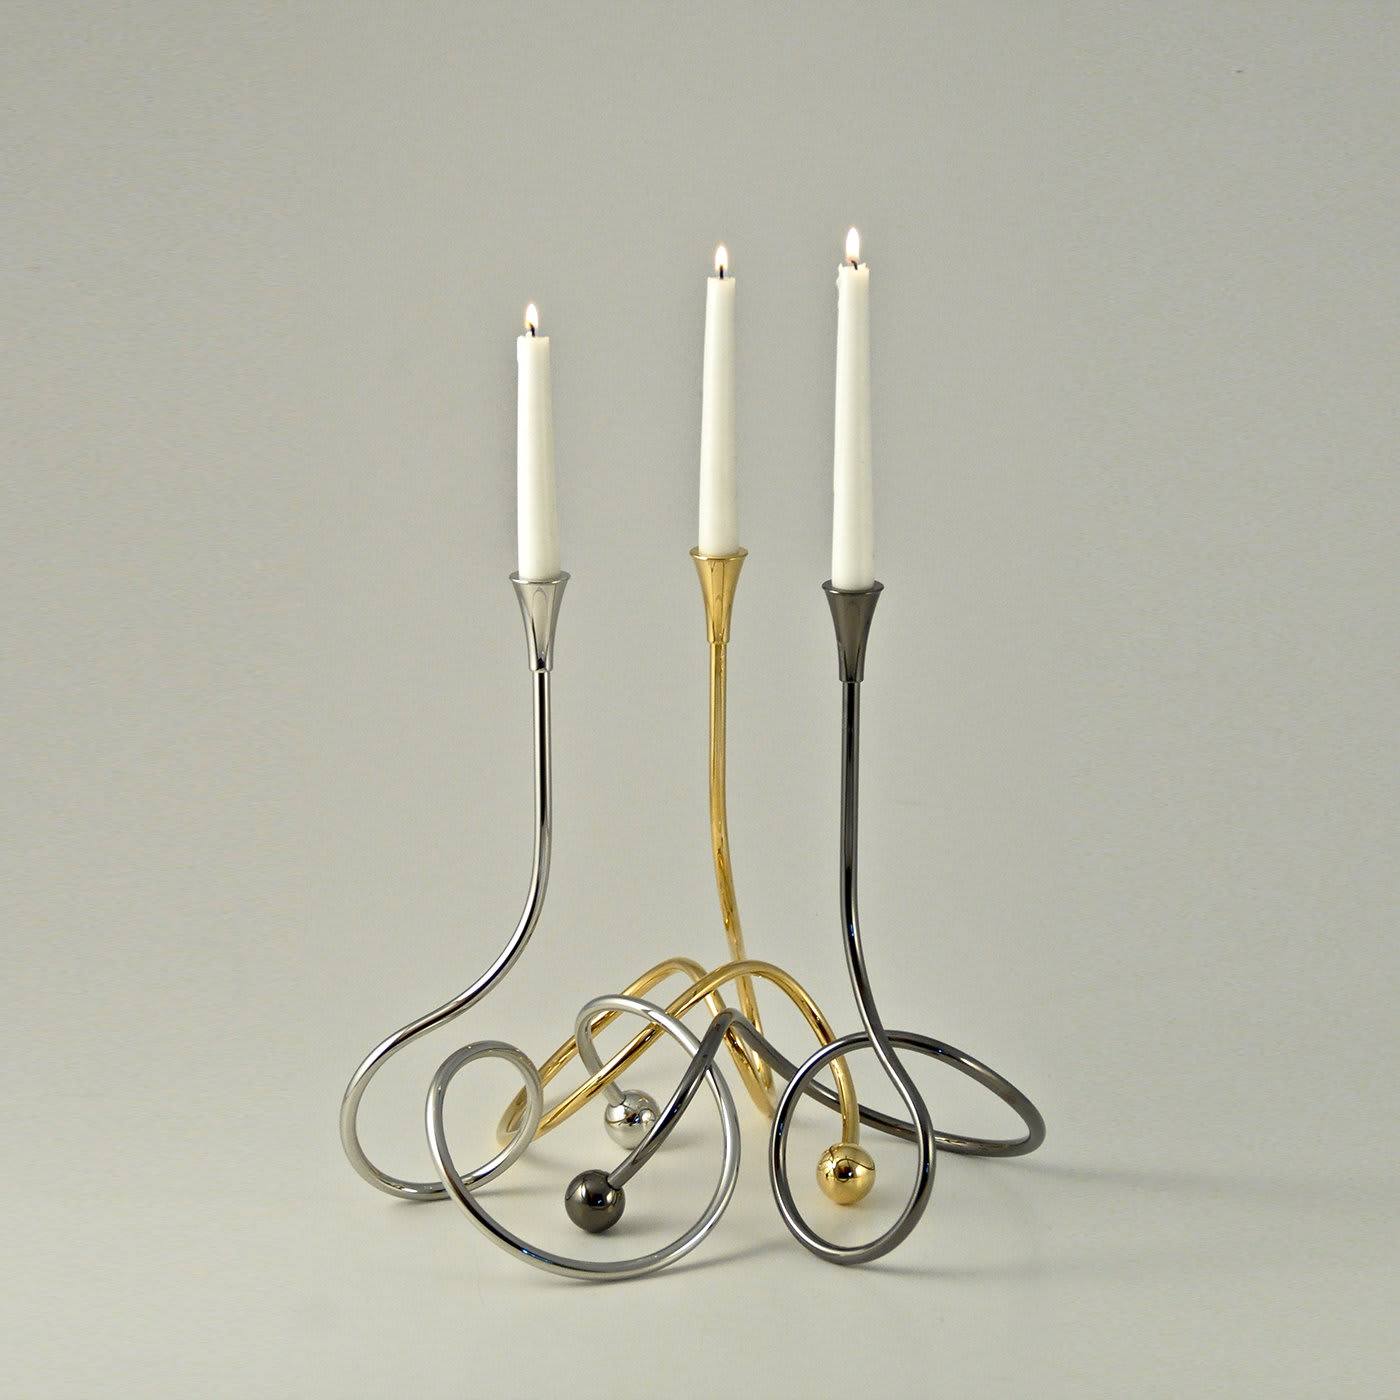 Malibù Set of 3 Candle Holders - Guido Niest